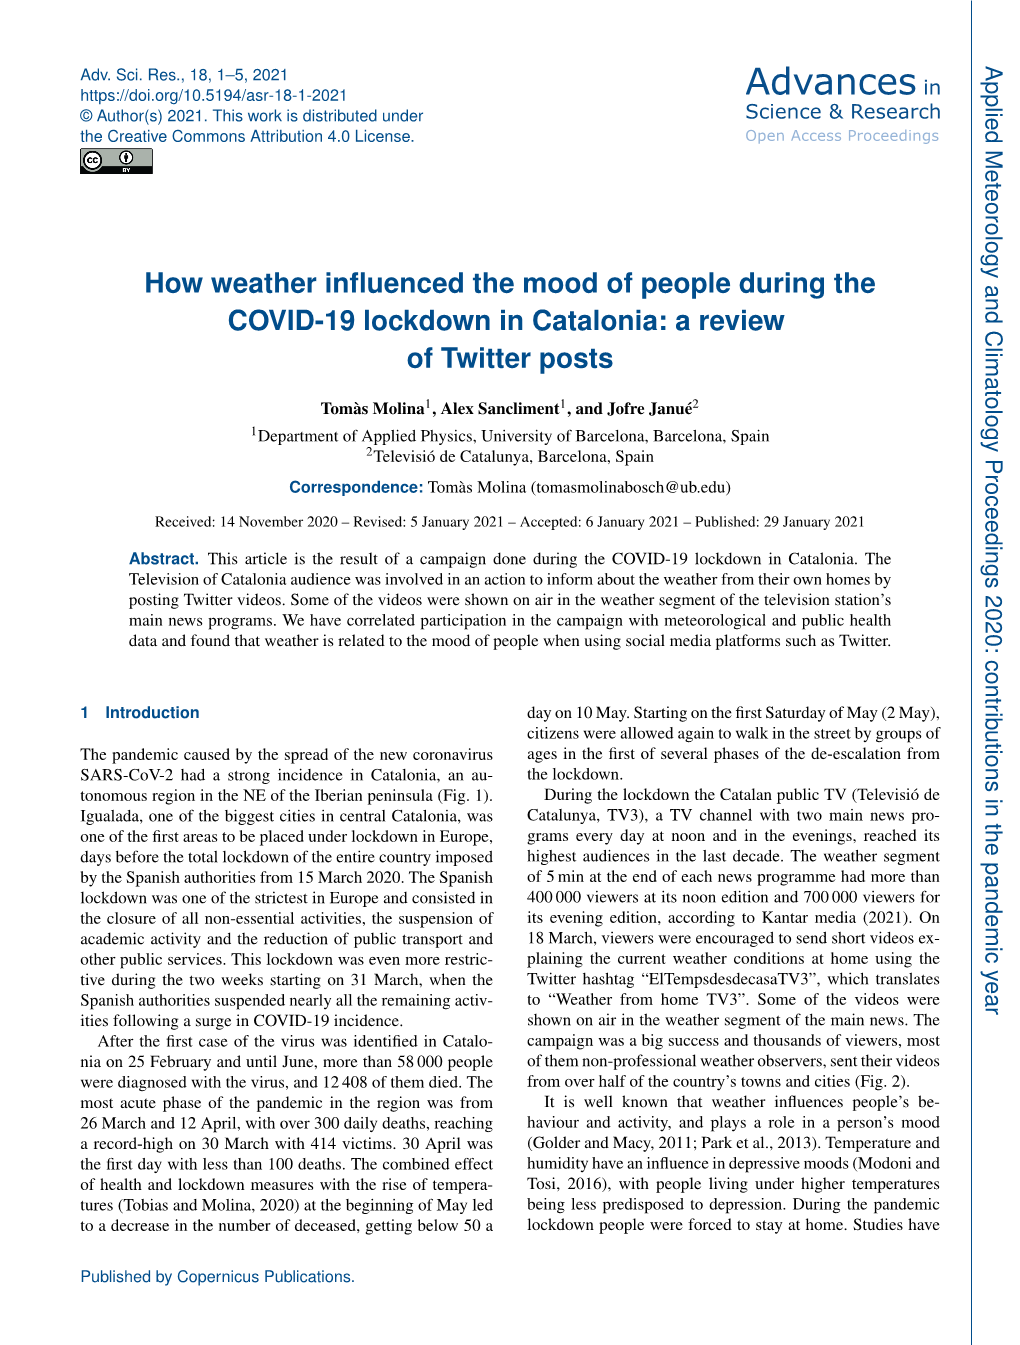 How Weather Influenced the Mood of People During the COVID-19